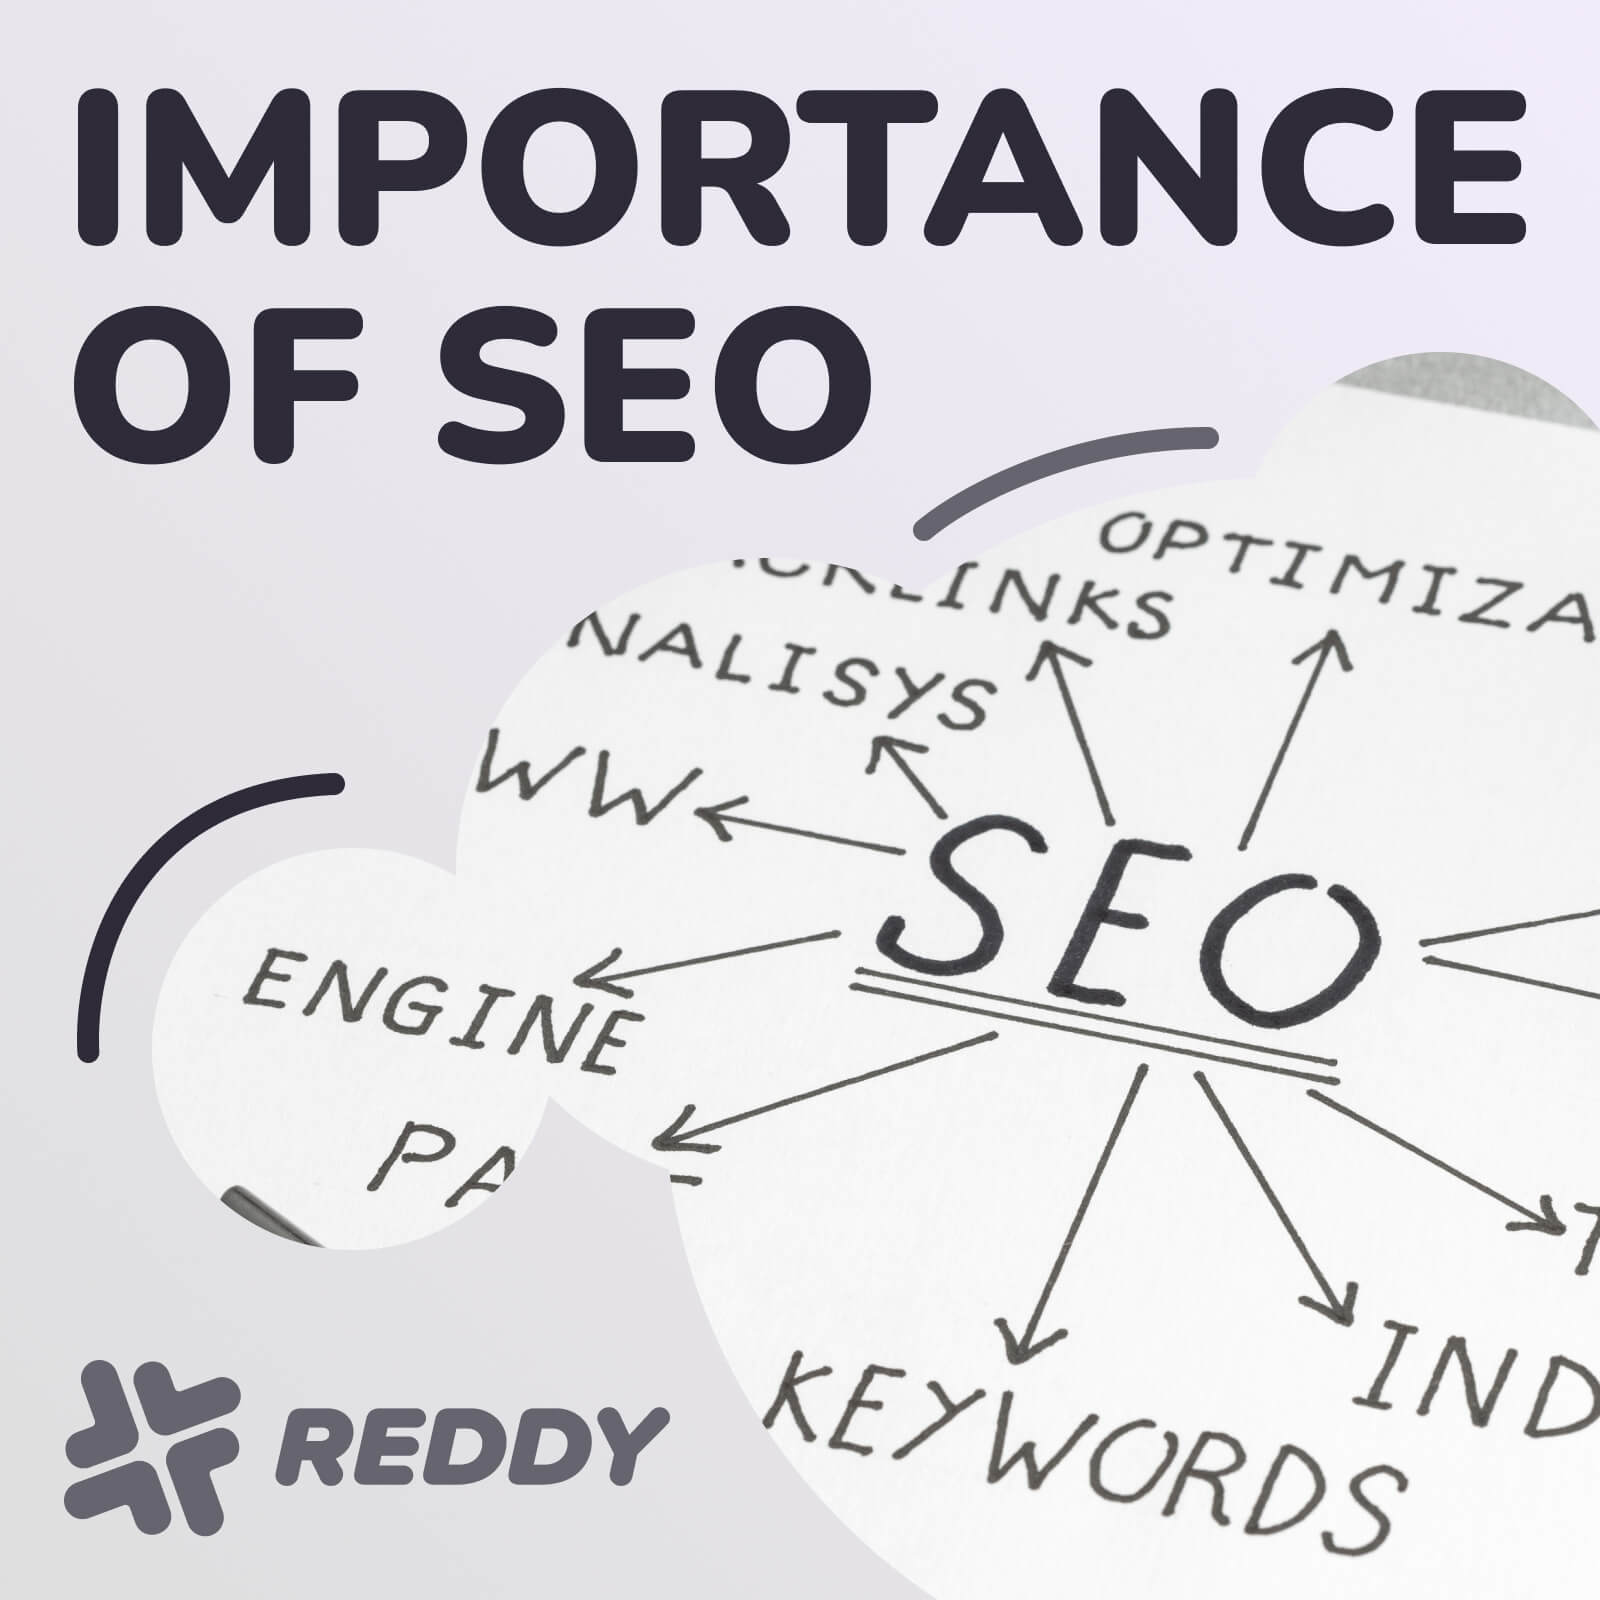 The Importance of SEO displayed as a mind map with arrows pointing to keywords, engine, optimisation